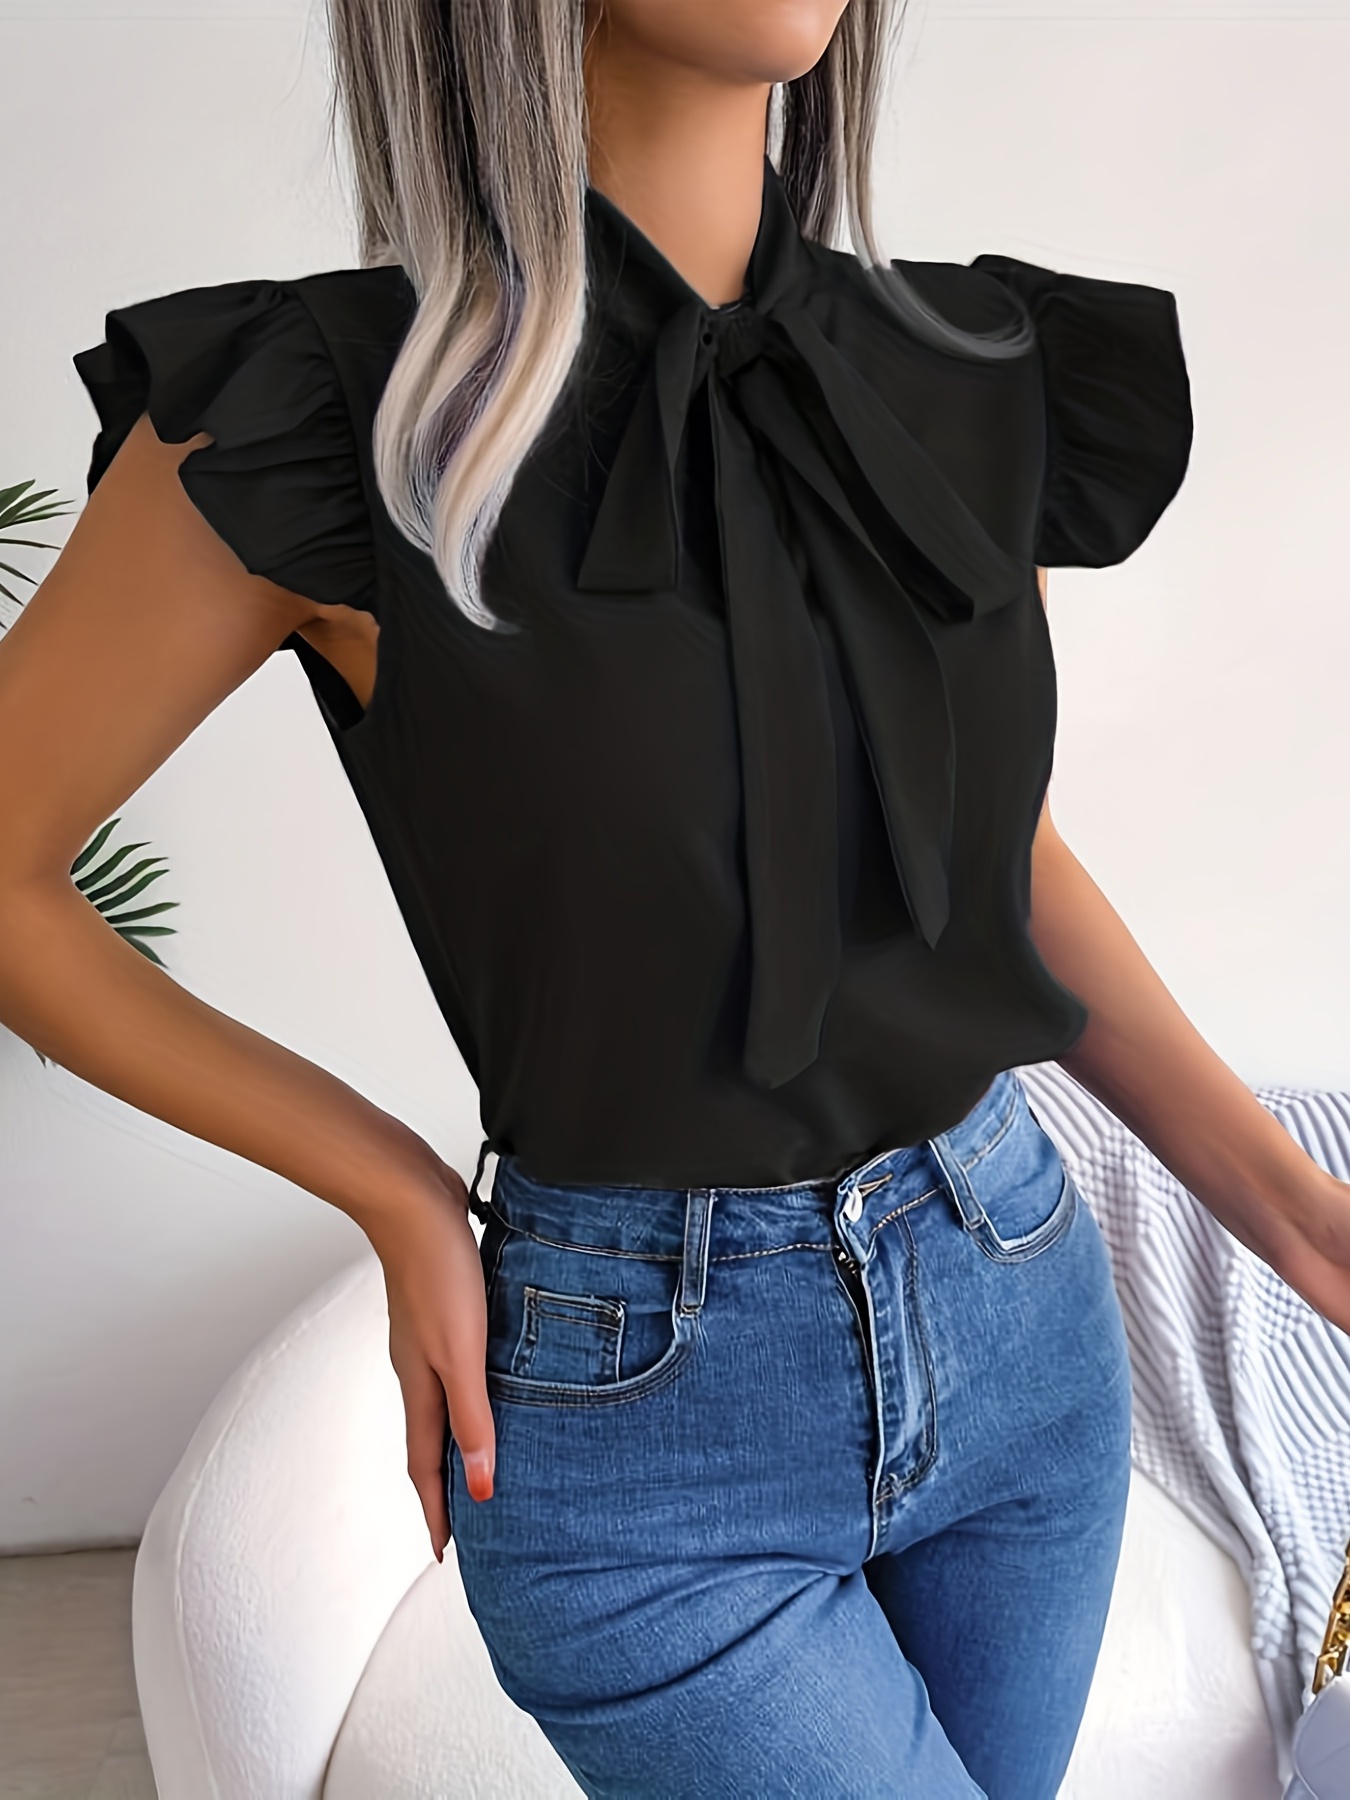 Womens Bow Tie Front Frilly Ruffle Solid Chiffon Blouse Long Sleeve Shirt  Tops